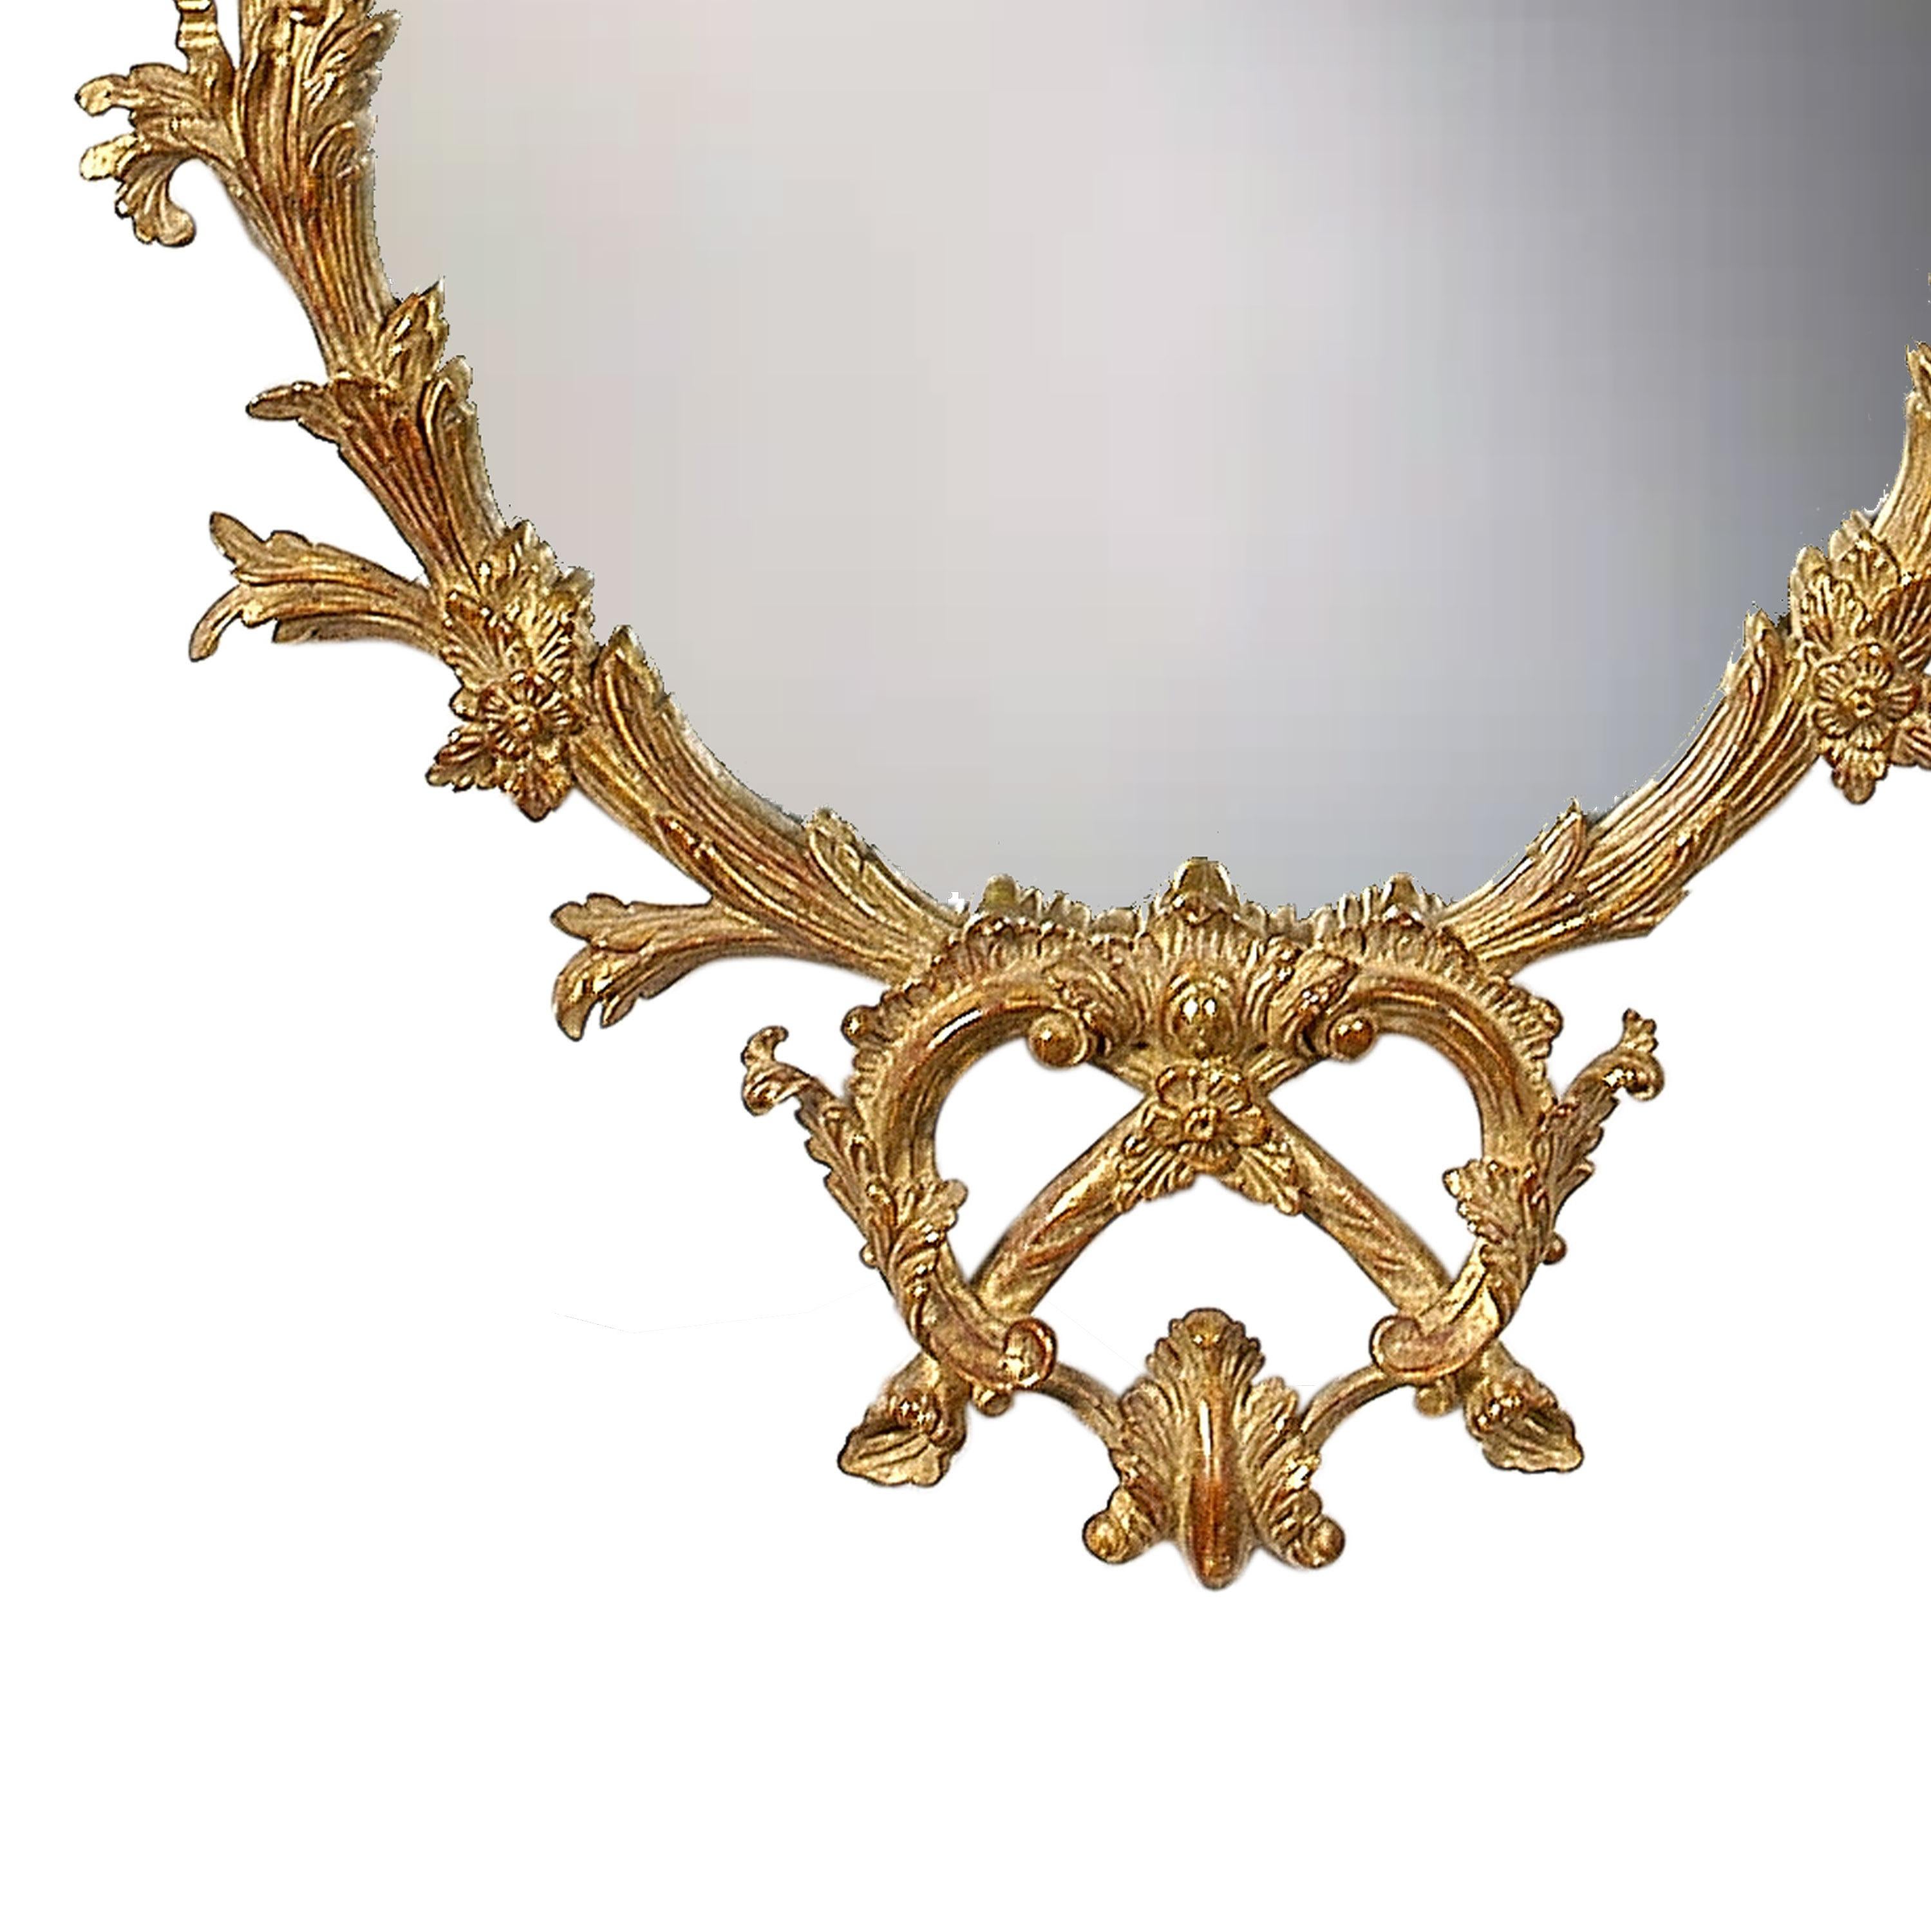 Neoclassical oval handcrafted mirror. Oval hand carved wooden structure with gold foil finished. Spain, 1970.